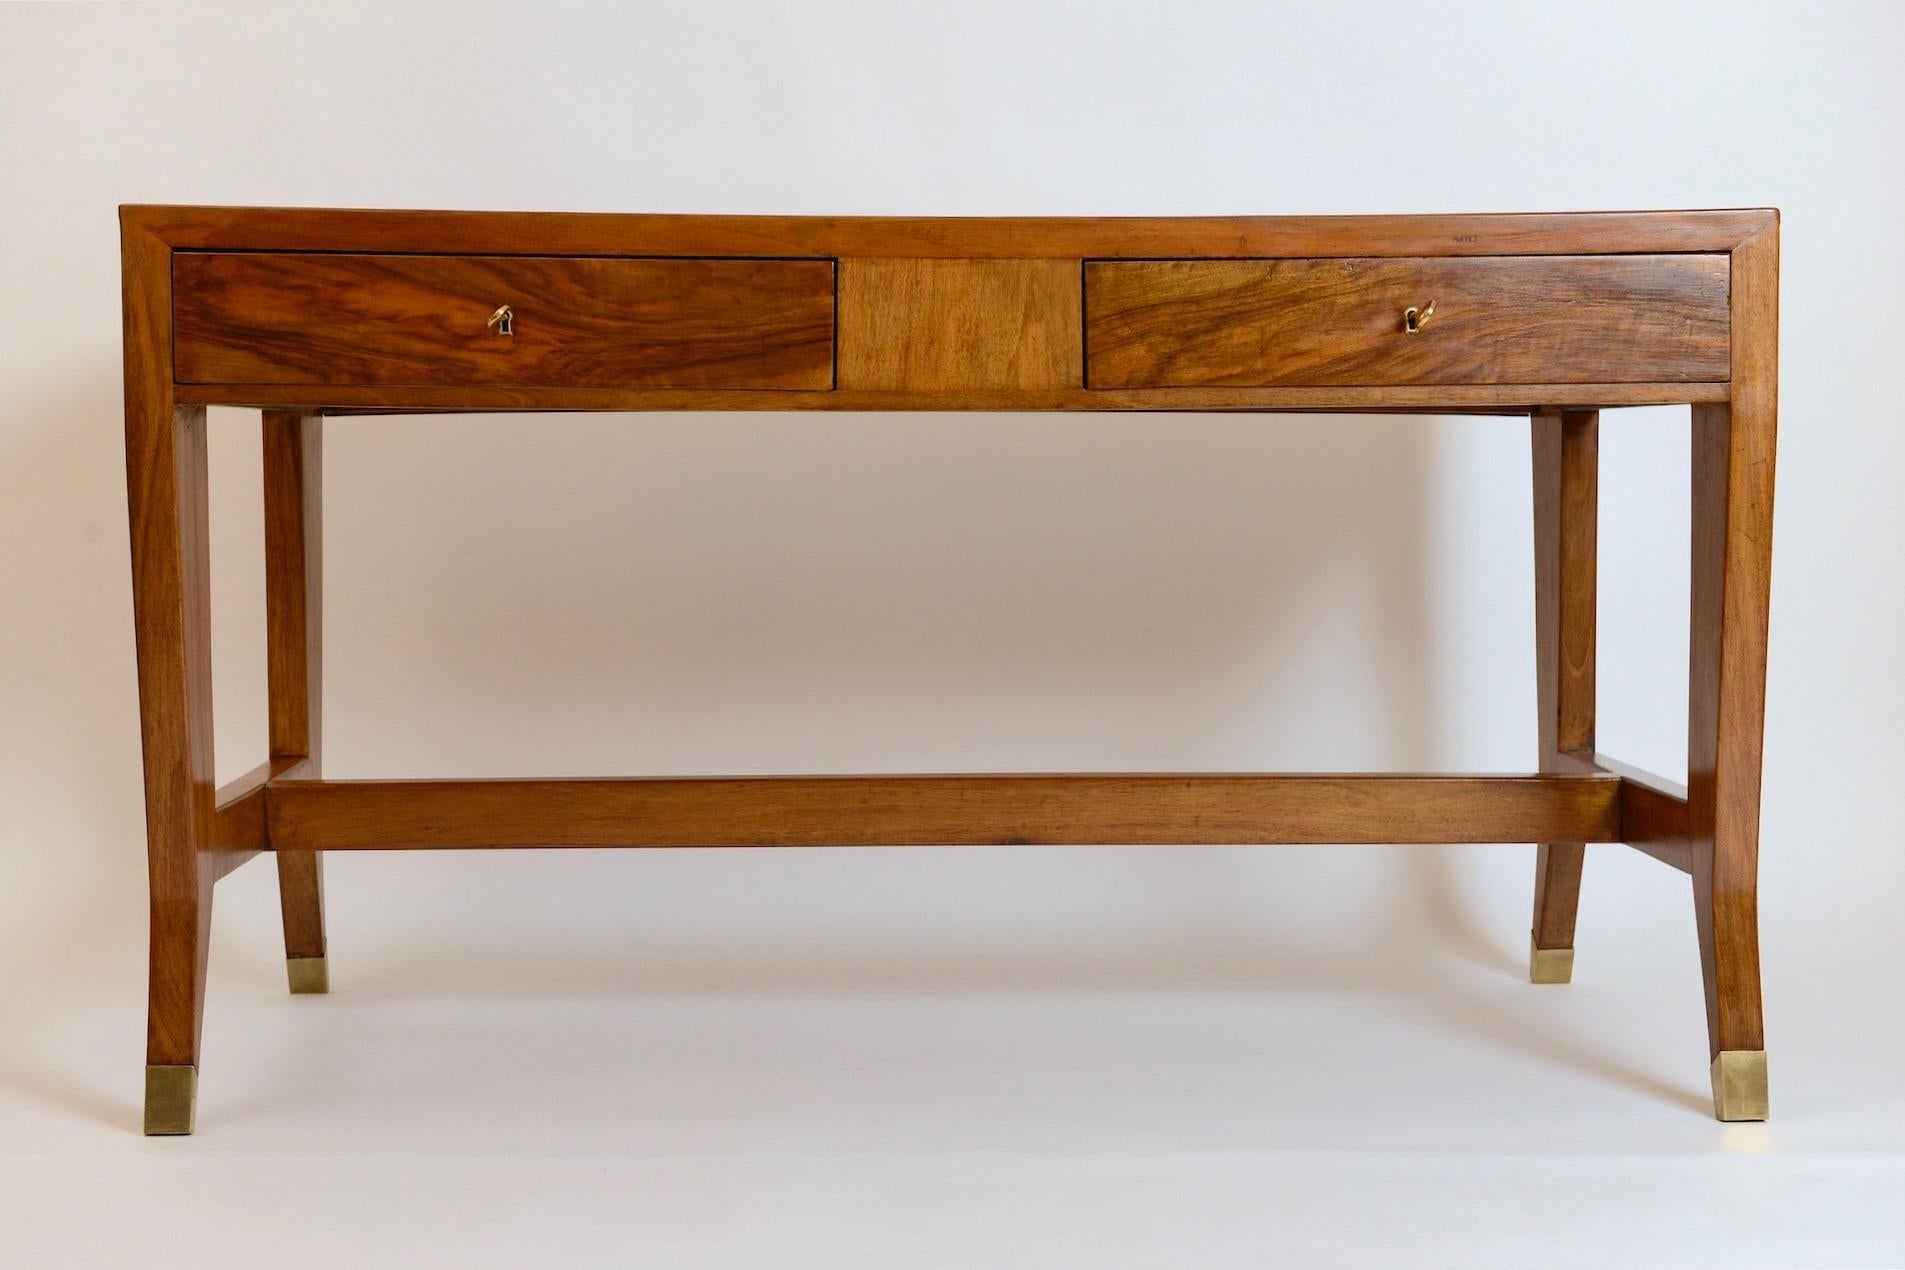 A stunning two-drawer walnut writing desk by one of Italy’s greatest architect and designers, Gio Ponti. Designed for the University of Padova, this substantial piece features a beautiful decorative back panel along with Ponti’s signature turned out